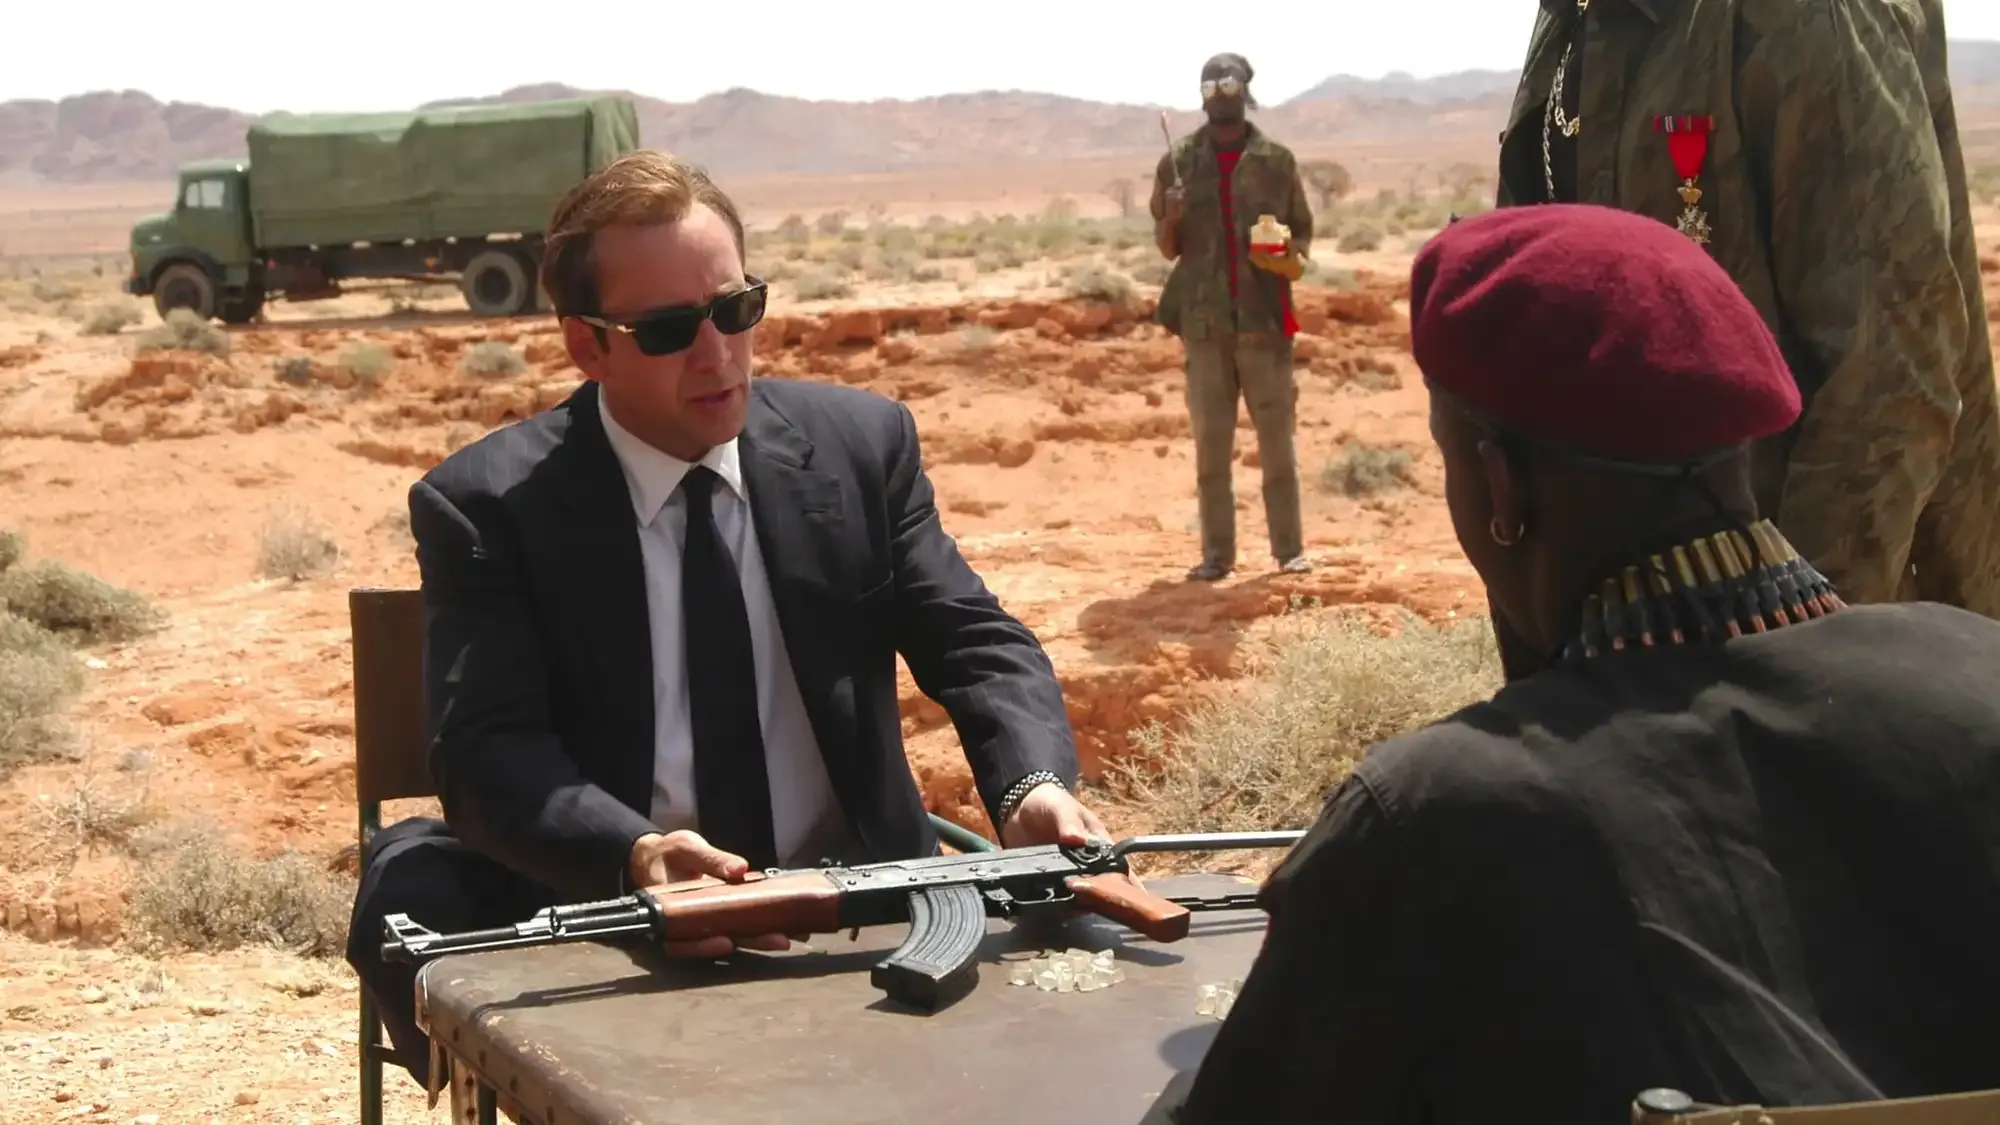 Lord of War movie review